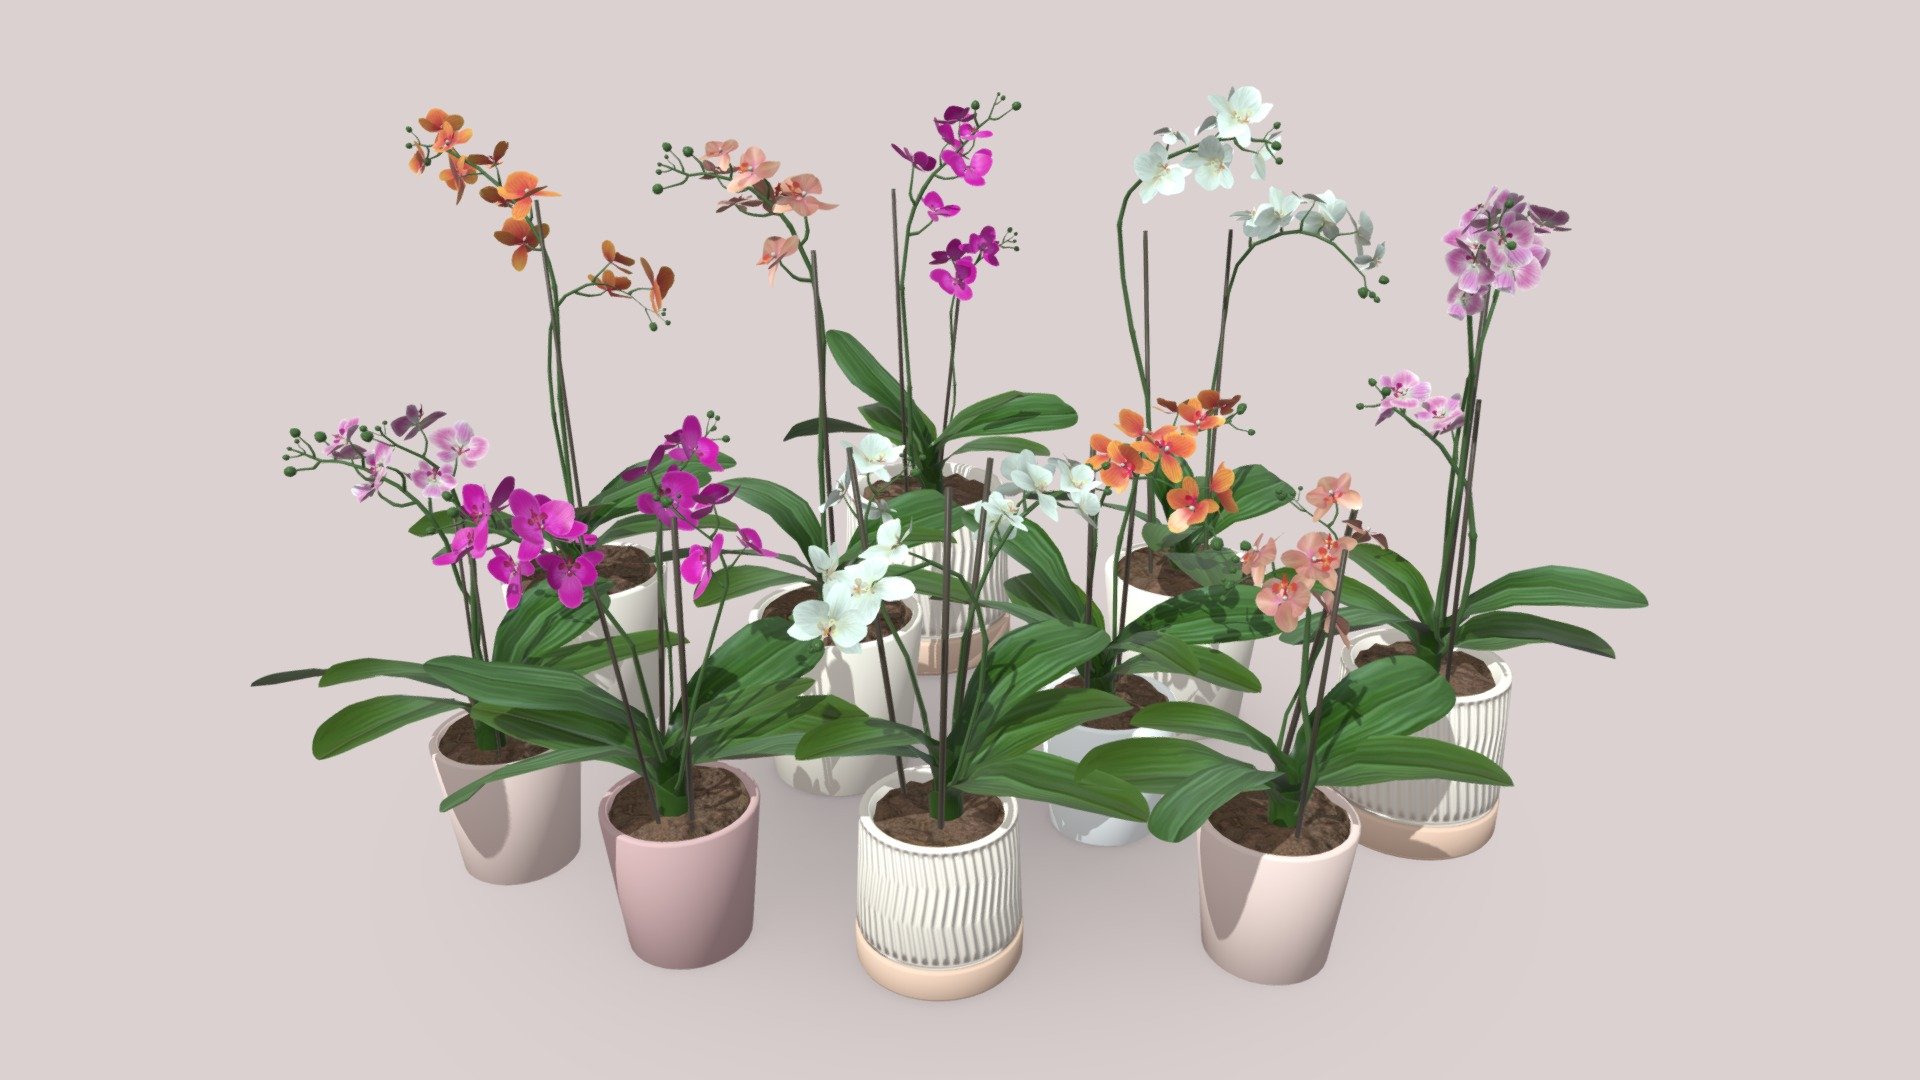 Handpainted orchids made for House Flipper 2 https://store.steampowered.com/app/1190970/House_Flipper_2/ 

Done in Blender, Substance Painter and Substance Designer. Pots created by my friend, Aleksander Pantopulos 3d model